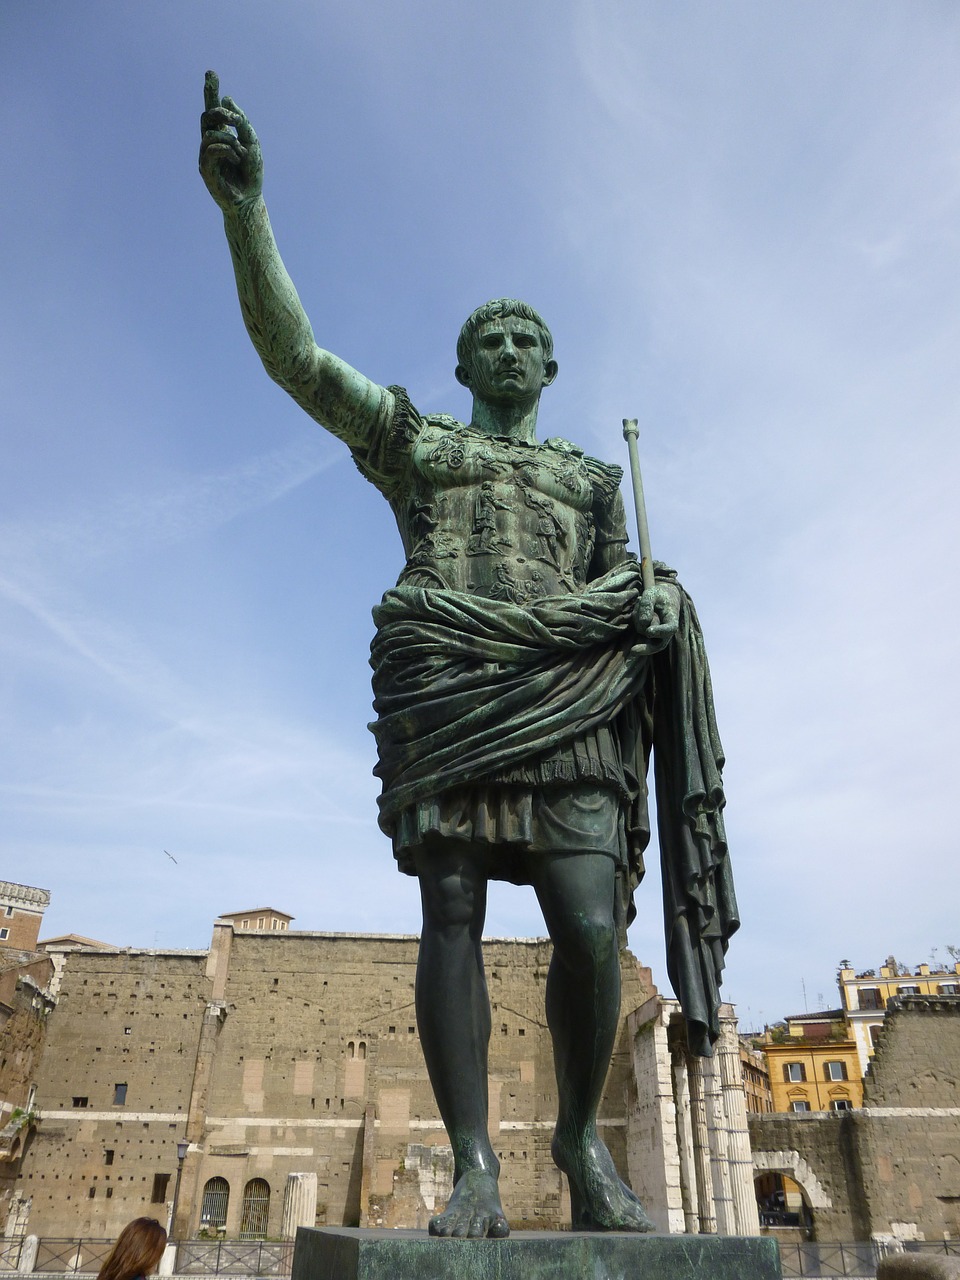 PHOTO: Photo taken from beneath a towering statue of Julius Caesar, arm outstretched toward the sky.